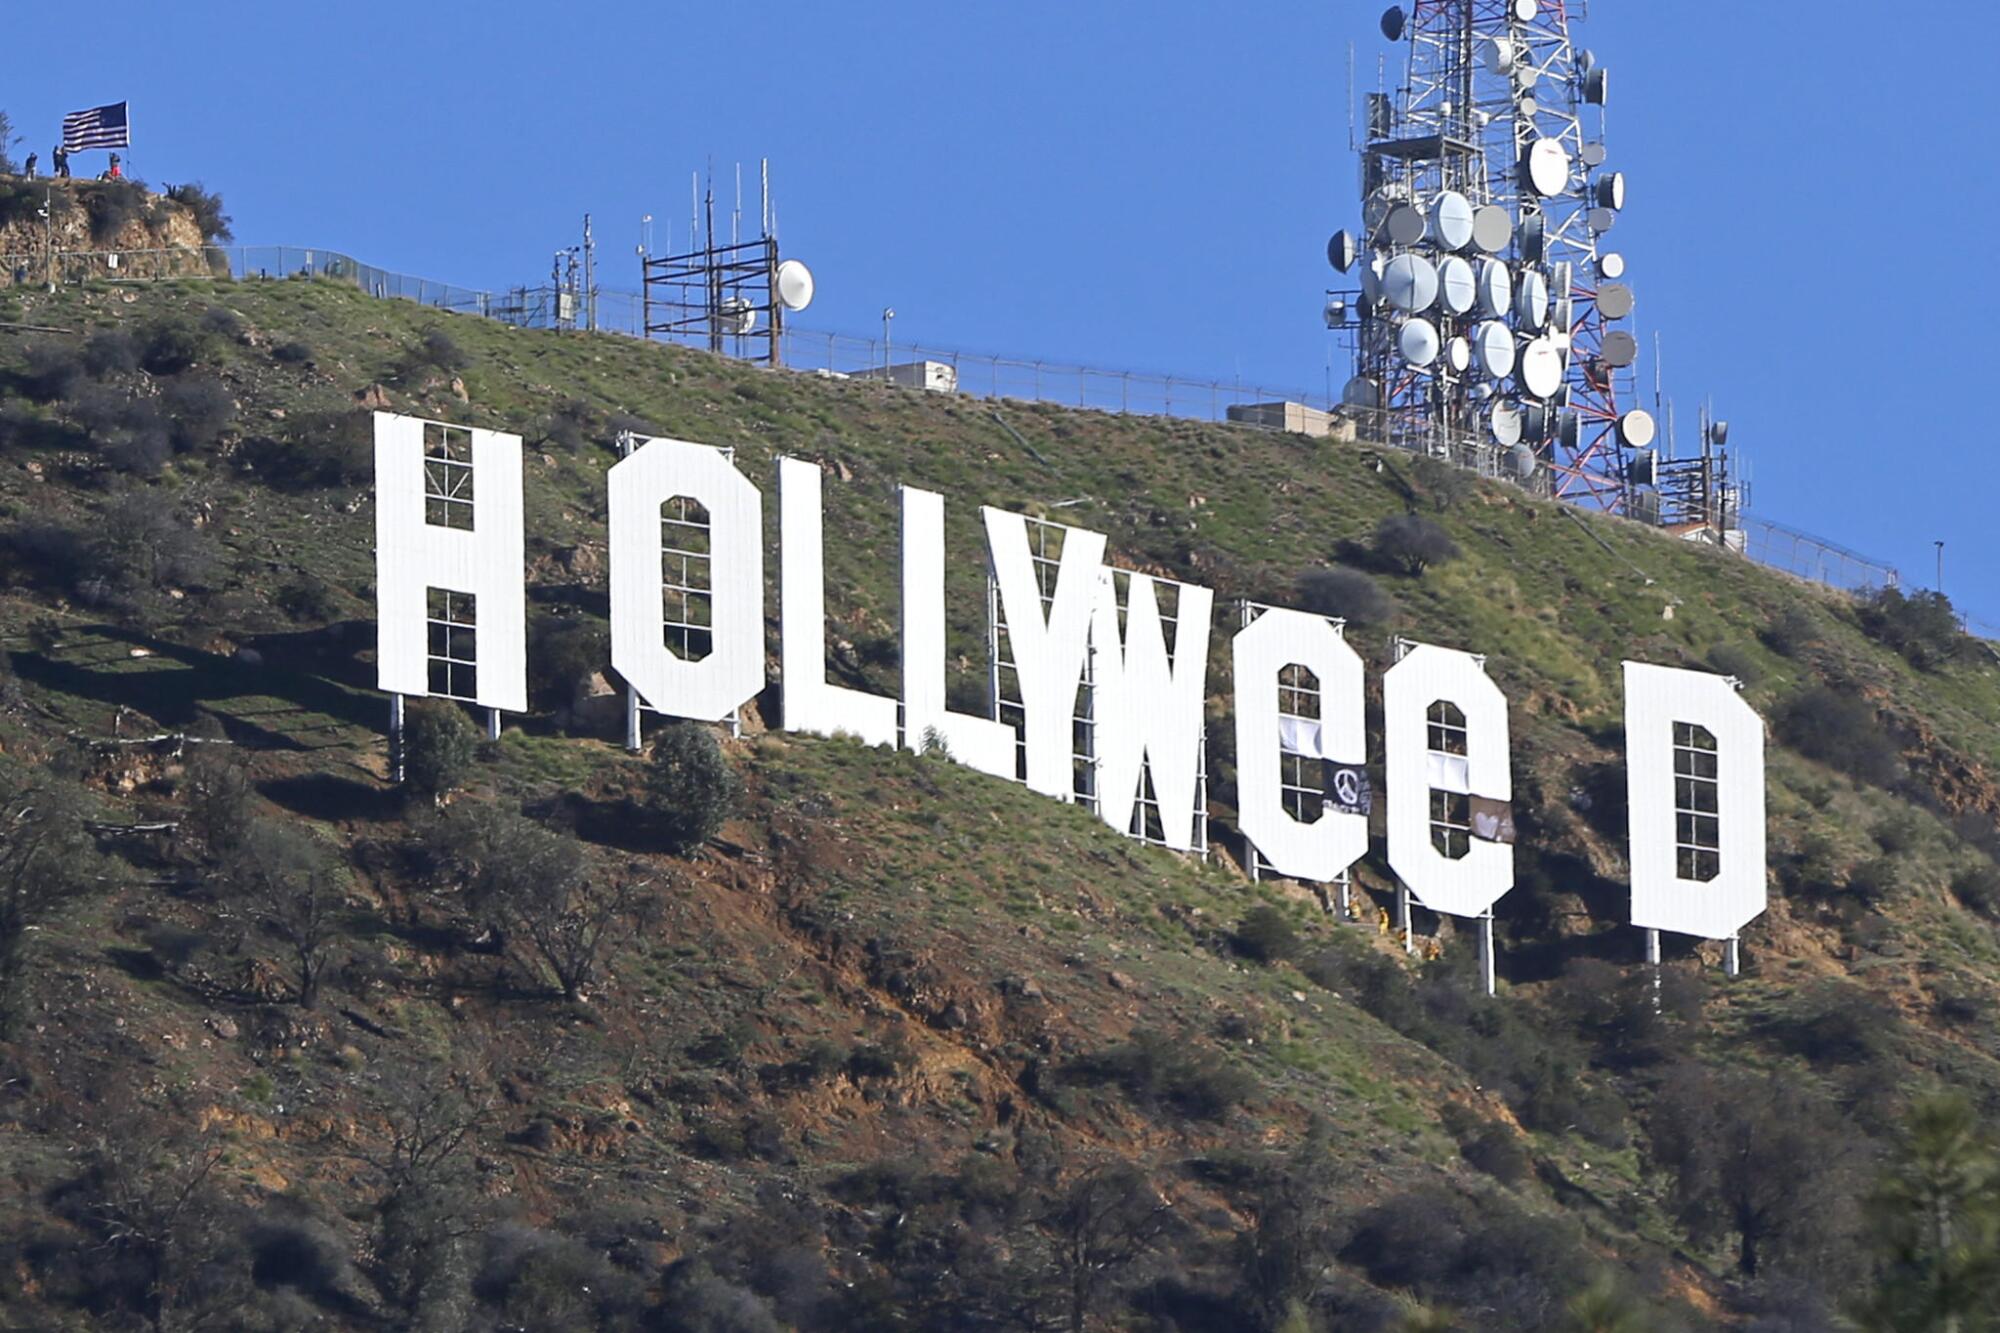 The Hollywood sign with e's instead of o's.  